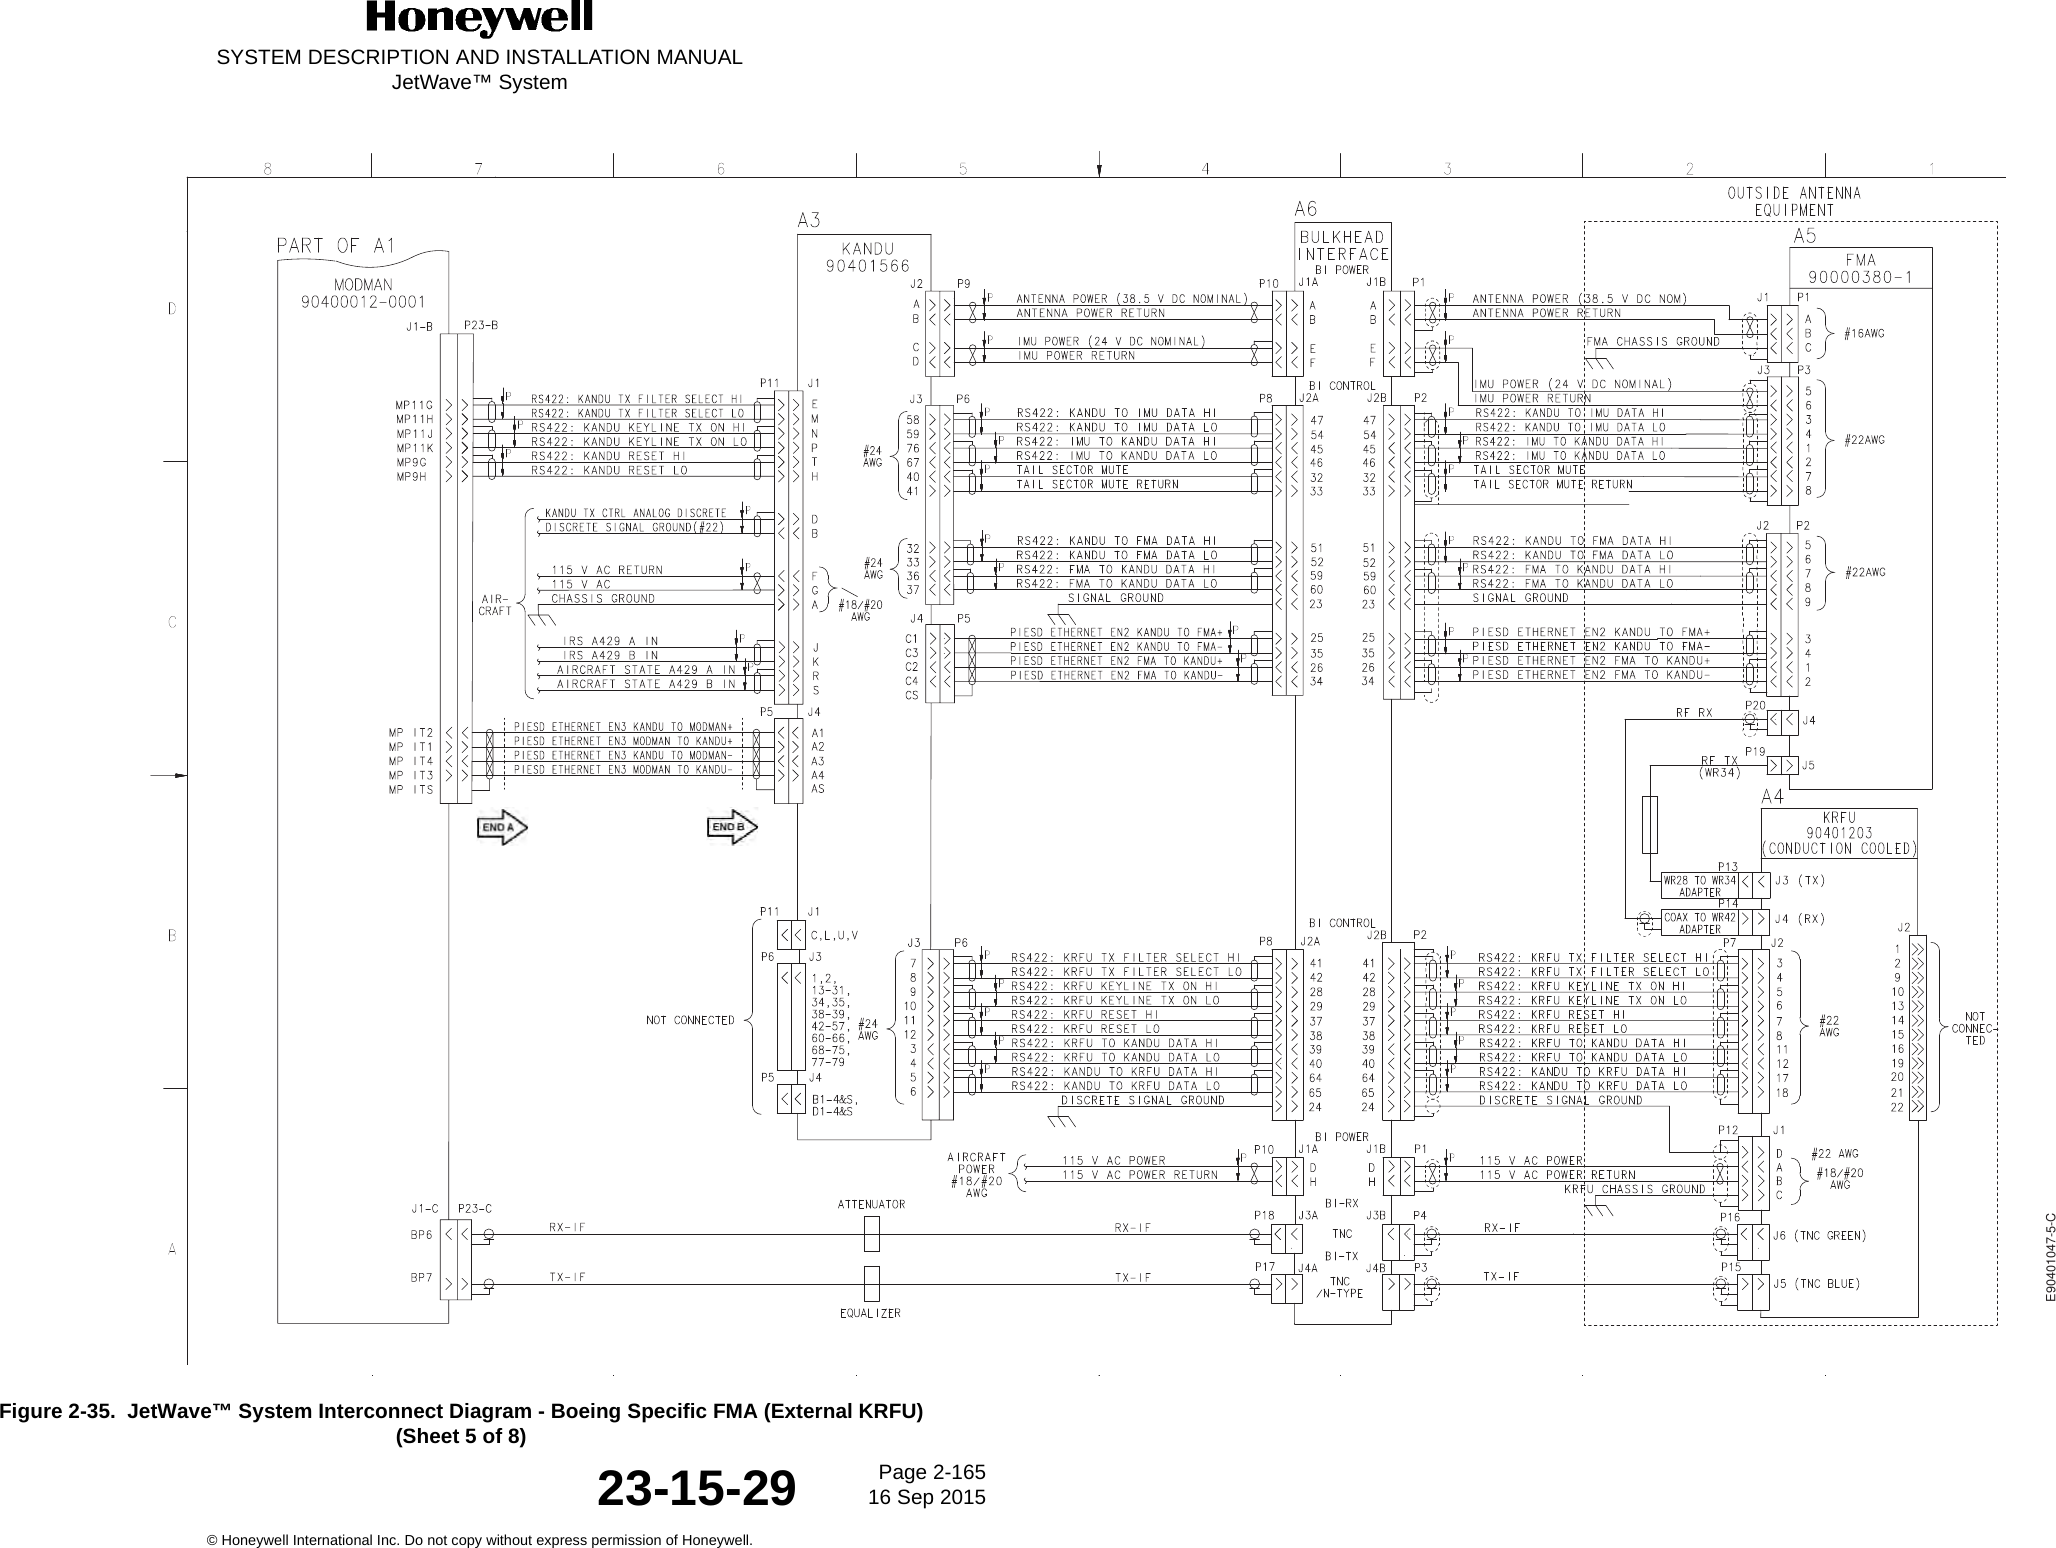 SYSTEM DESCRIPTION AND INSTALLATION MANUALJetWave™ SystemPage 2-165 16 Sep 2015© Honeywell International Inc. Do not copy without express permission of Honeywell.23-15-29Figure 2-35.  JetWave™ System Interconnect Diagram - Boeing Specific FMA (External KRFU) (Sheet 5 of 8)E90401047-5-C